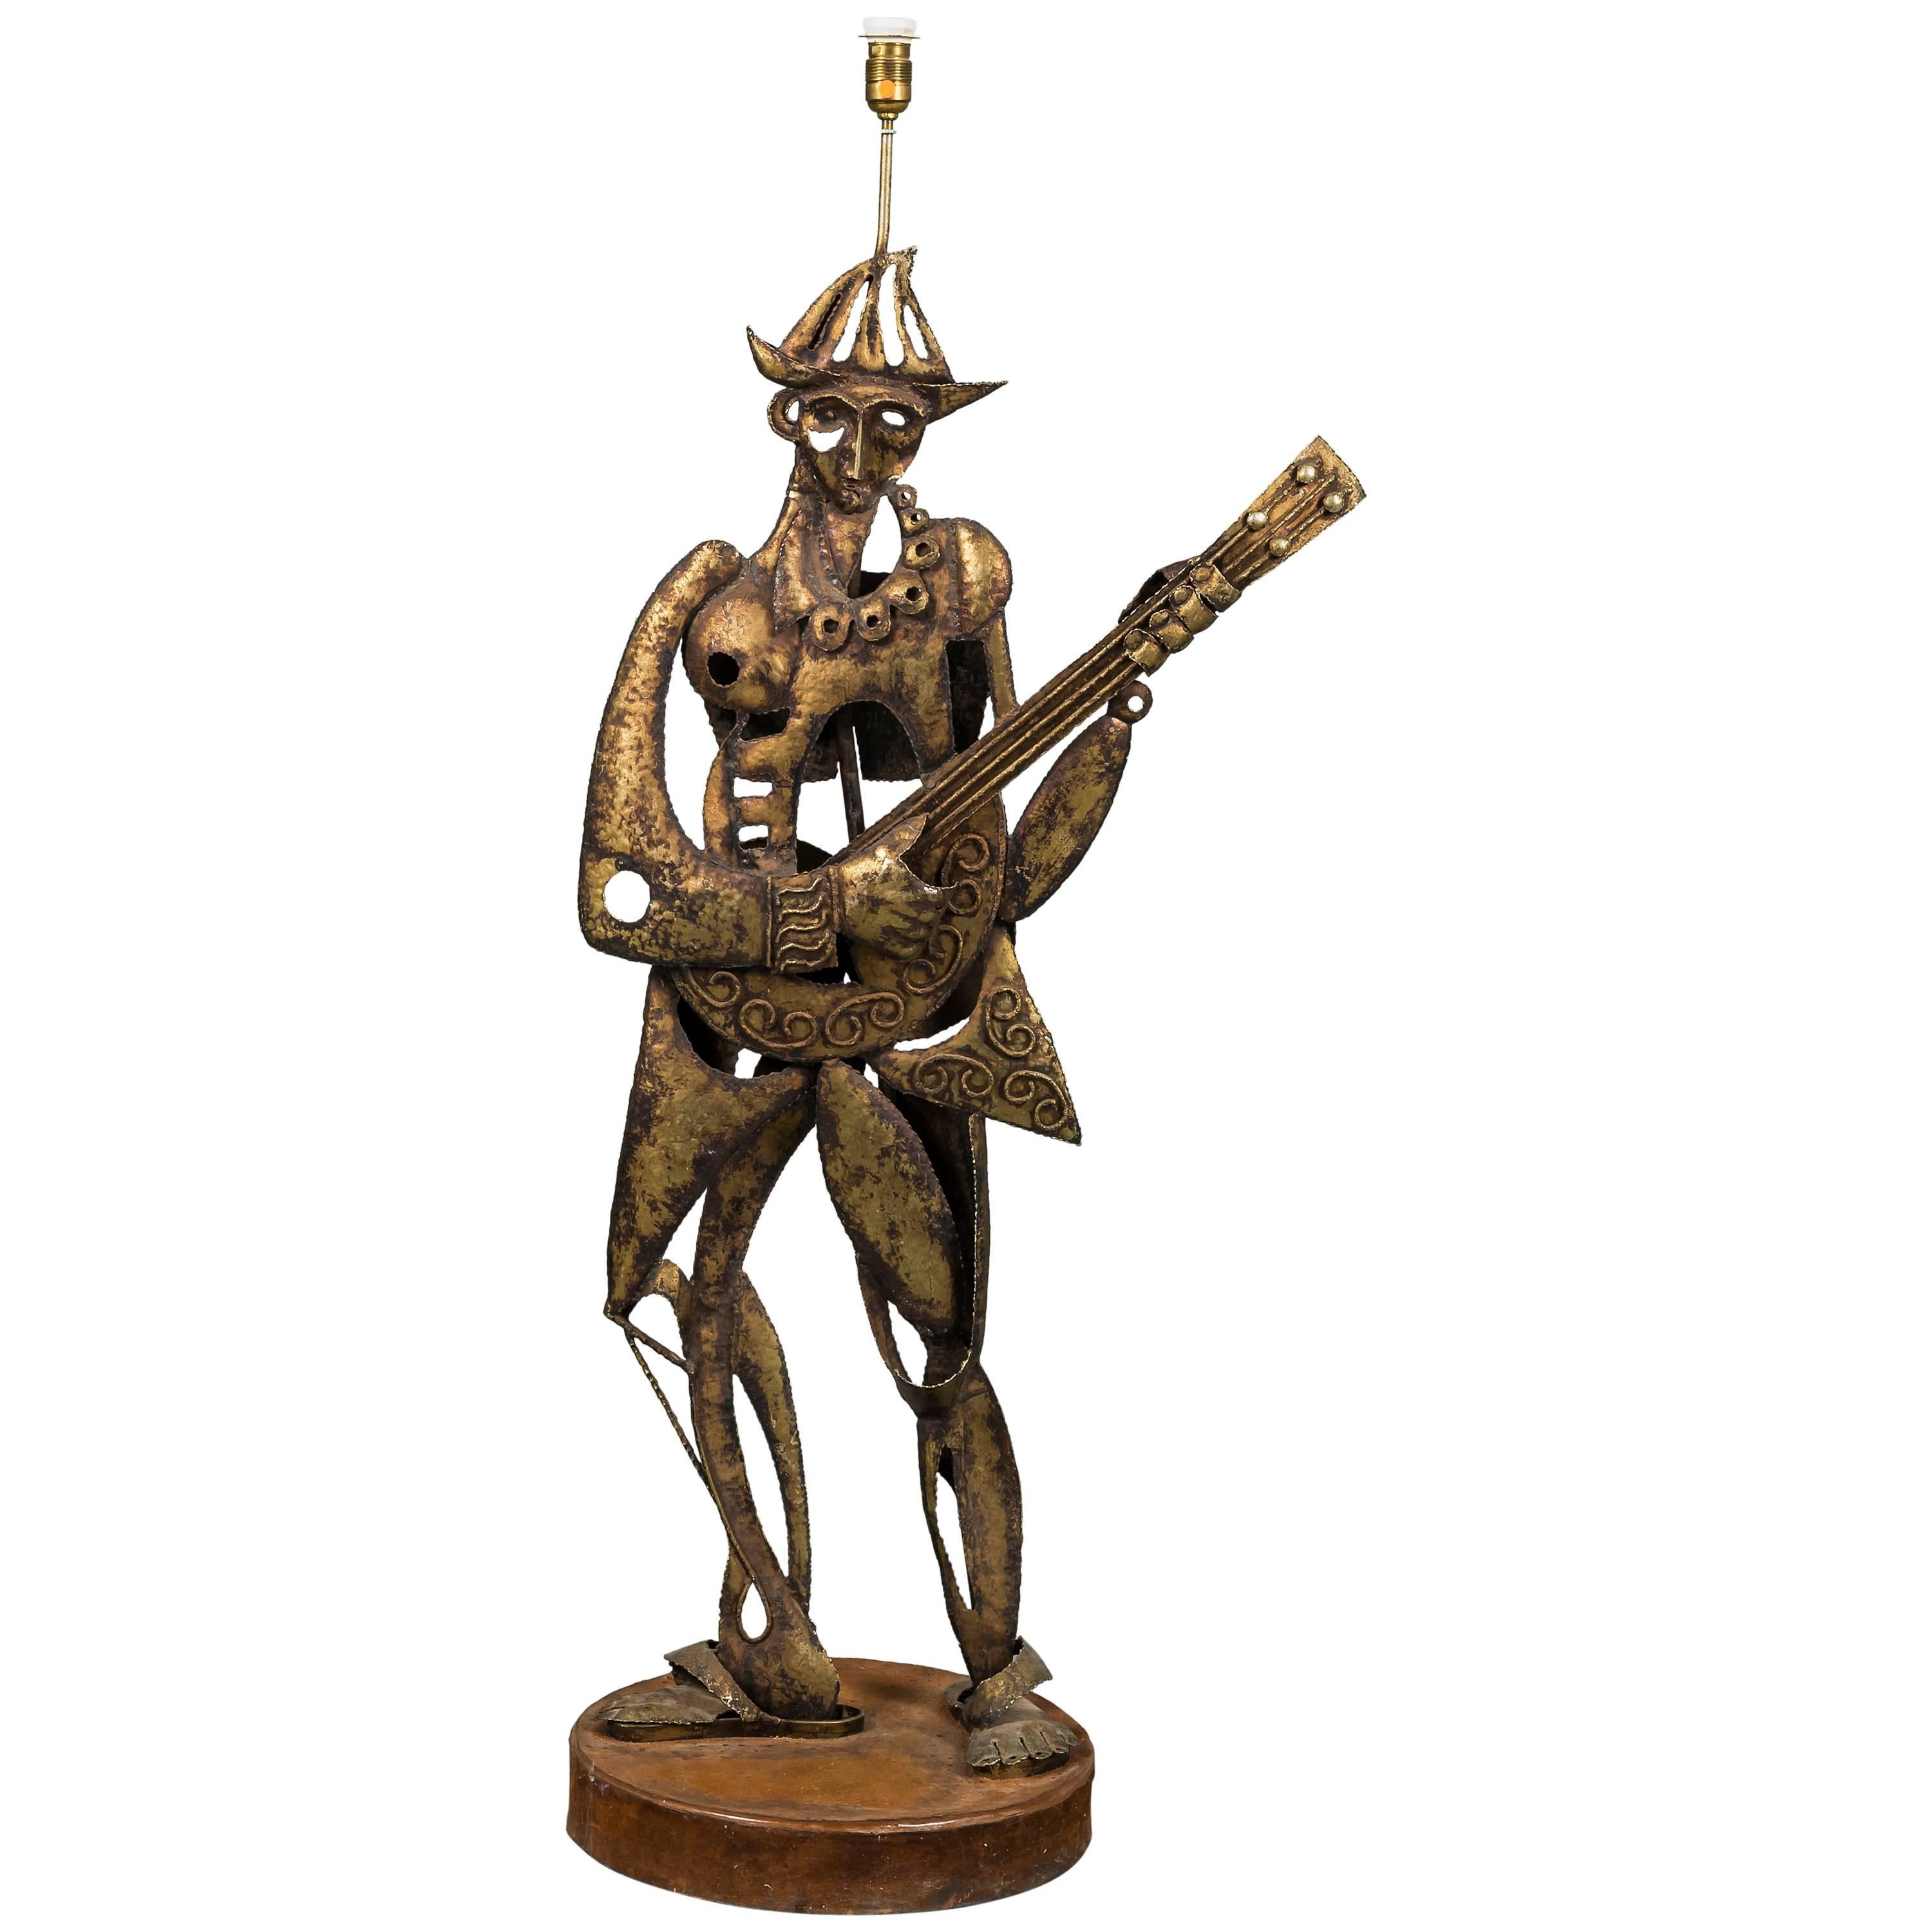 1950s Spanish Floor Lamp Inspired by Picasso's Harlequin Holding a Guitar For Sale